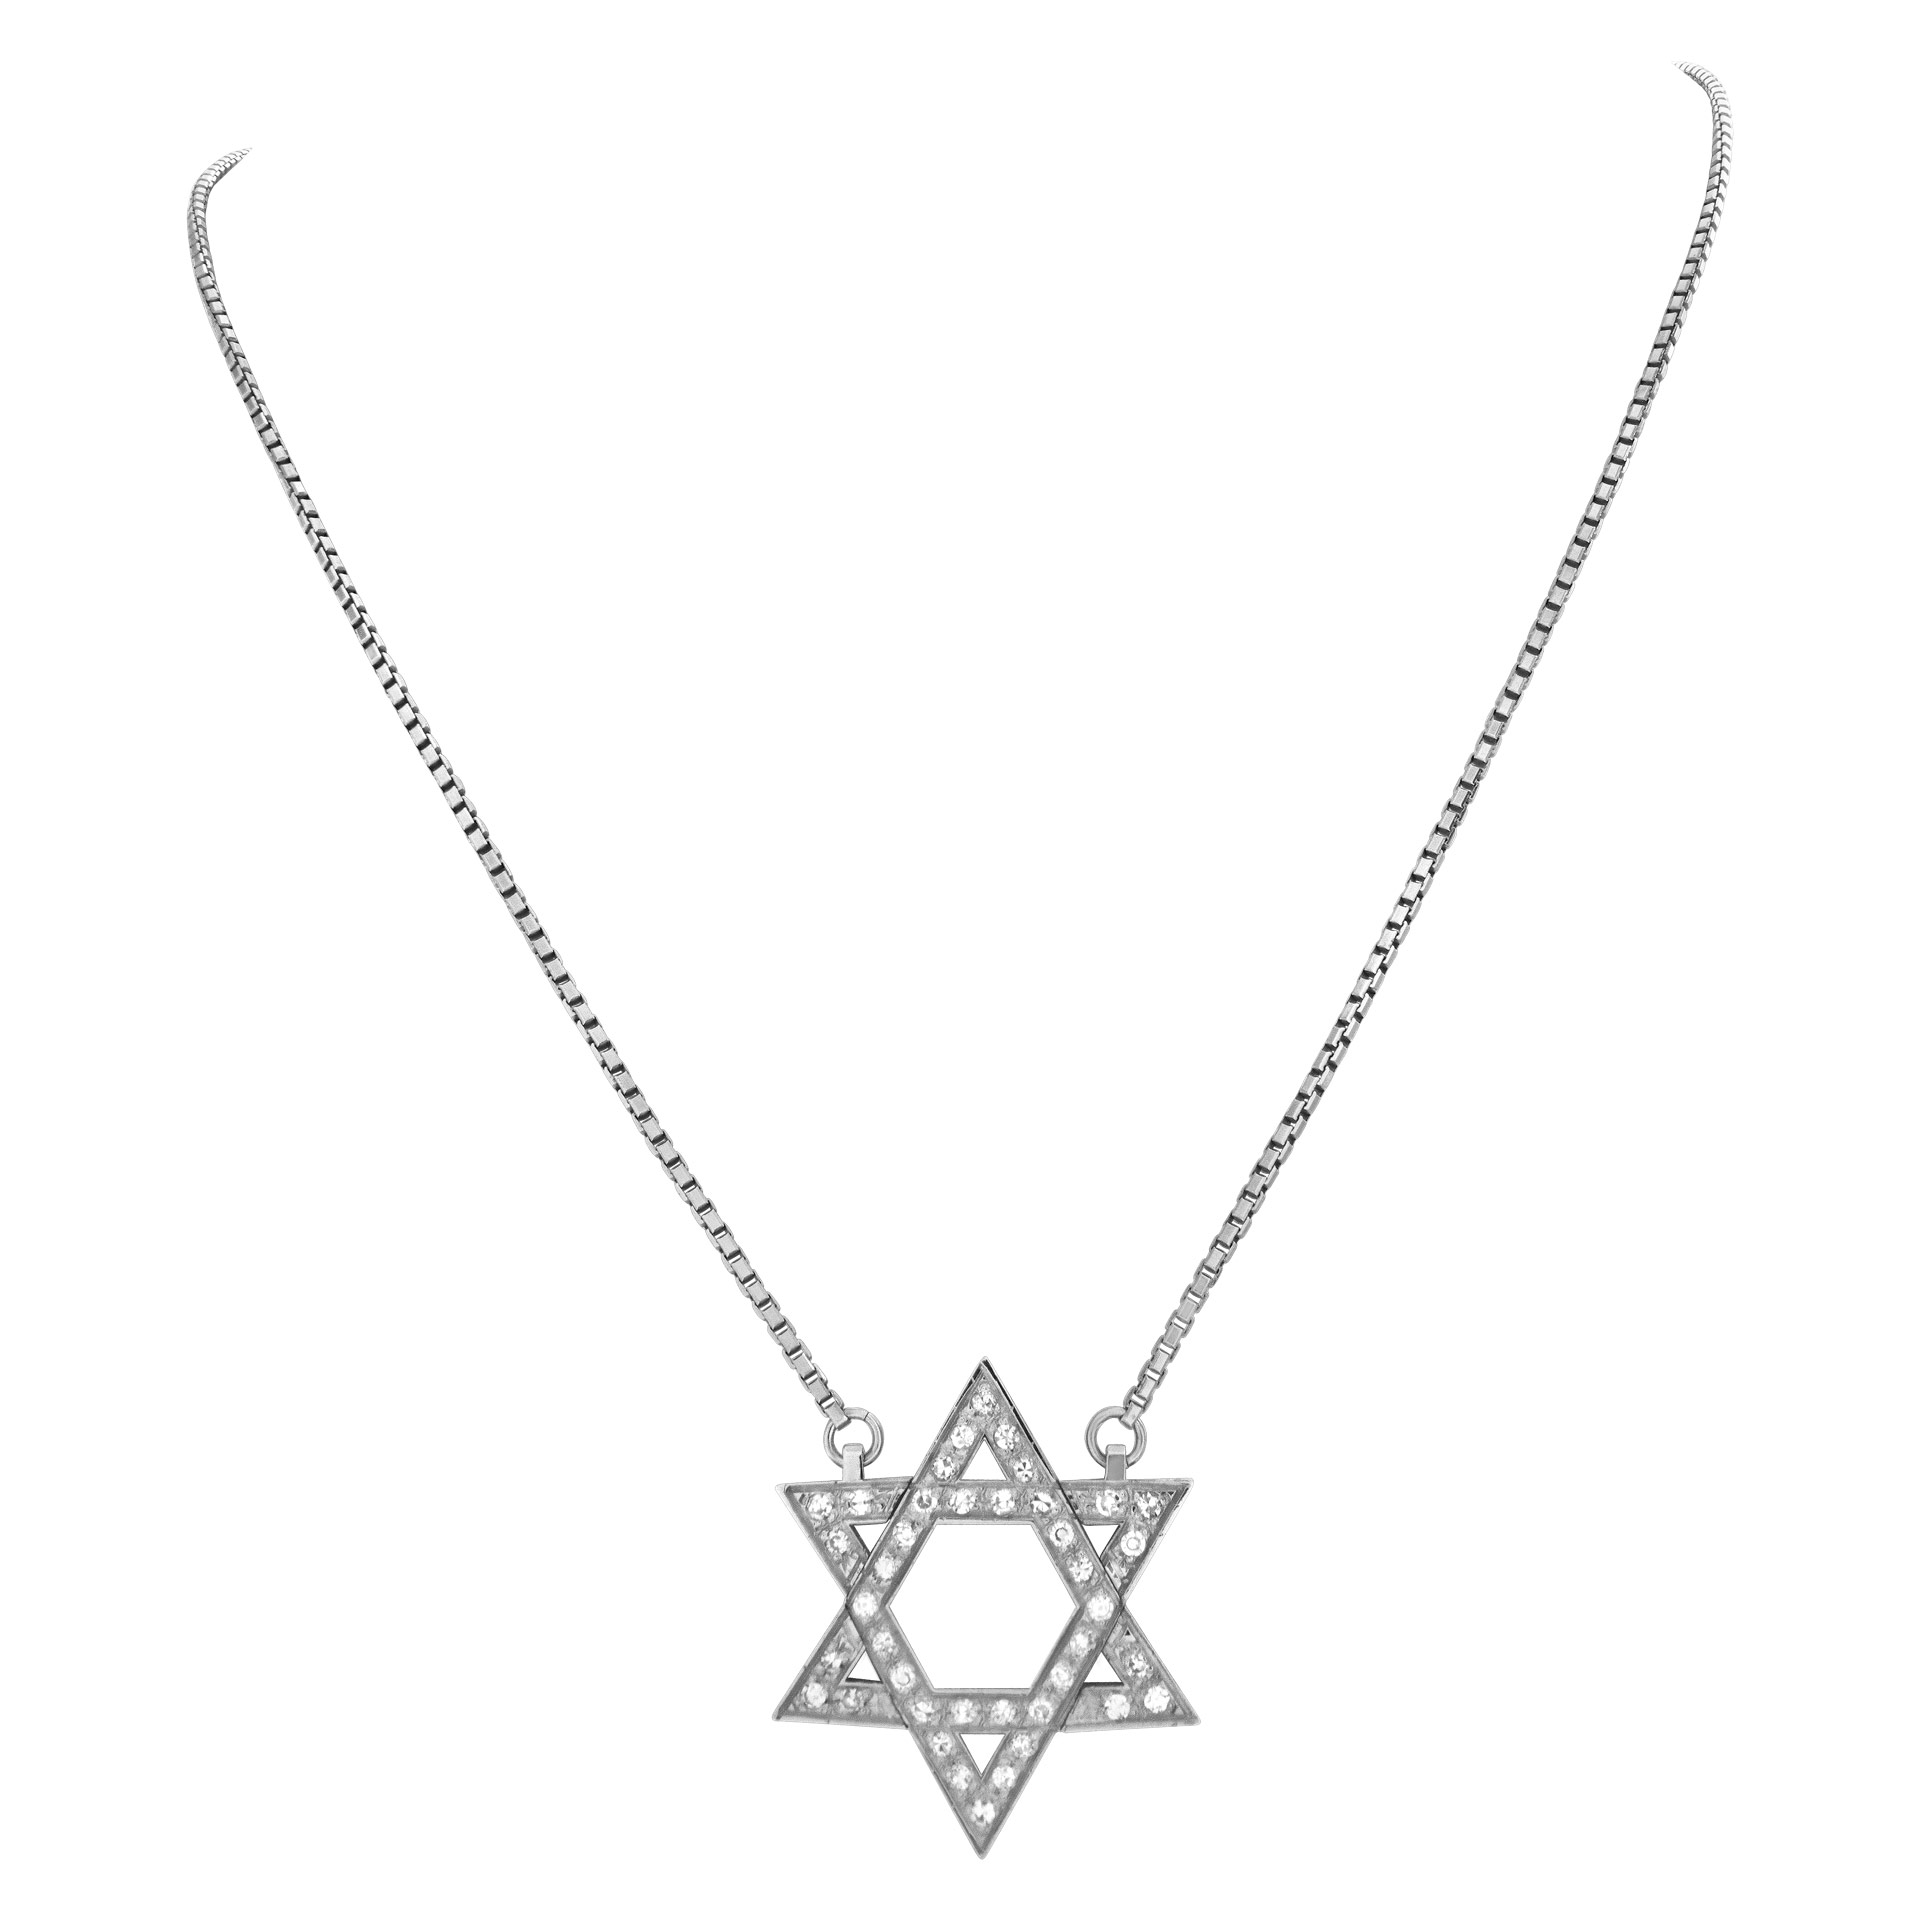 "Star of David" pendant with approximately 0.75 carat pave diamonds set in 18k white gold